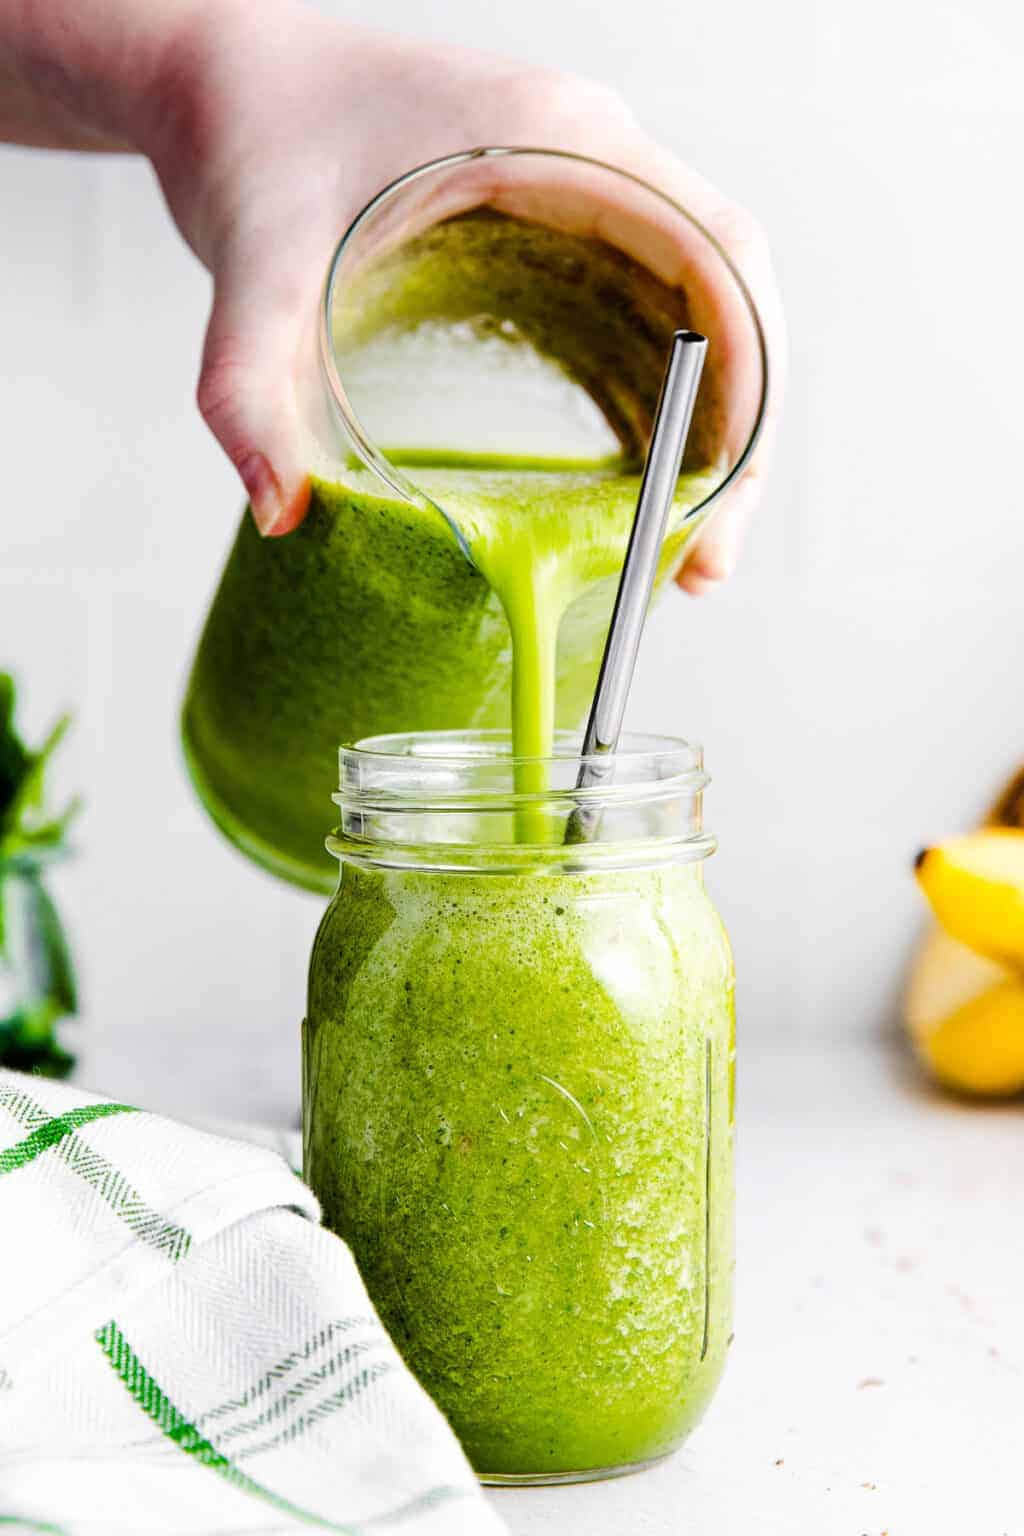 A side shot of a green smoothie being poured into a clear glass.